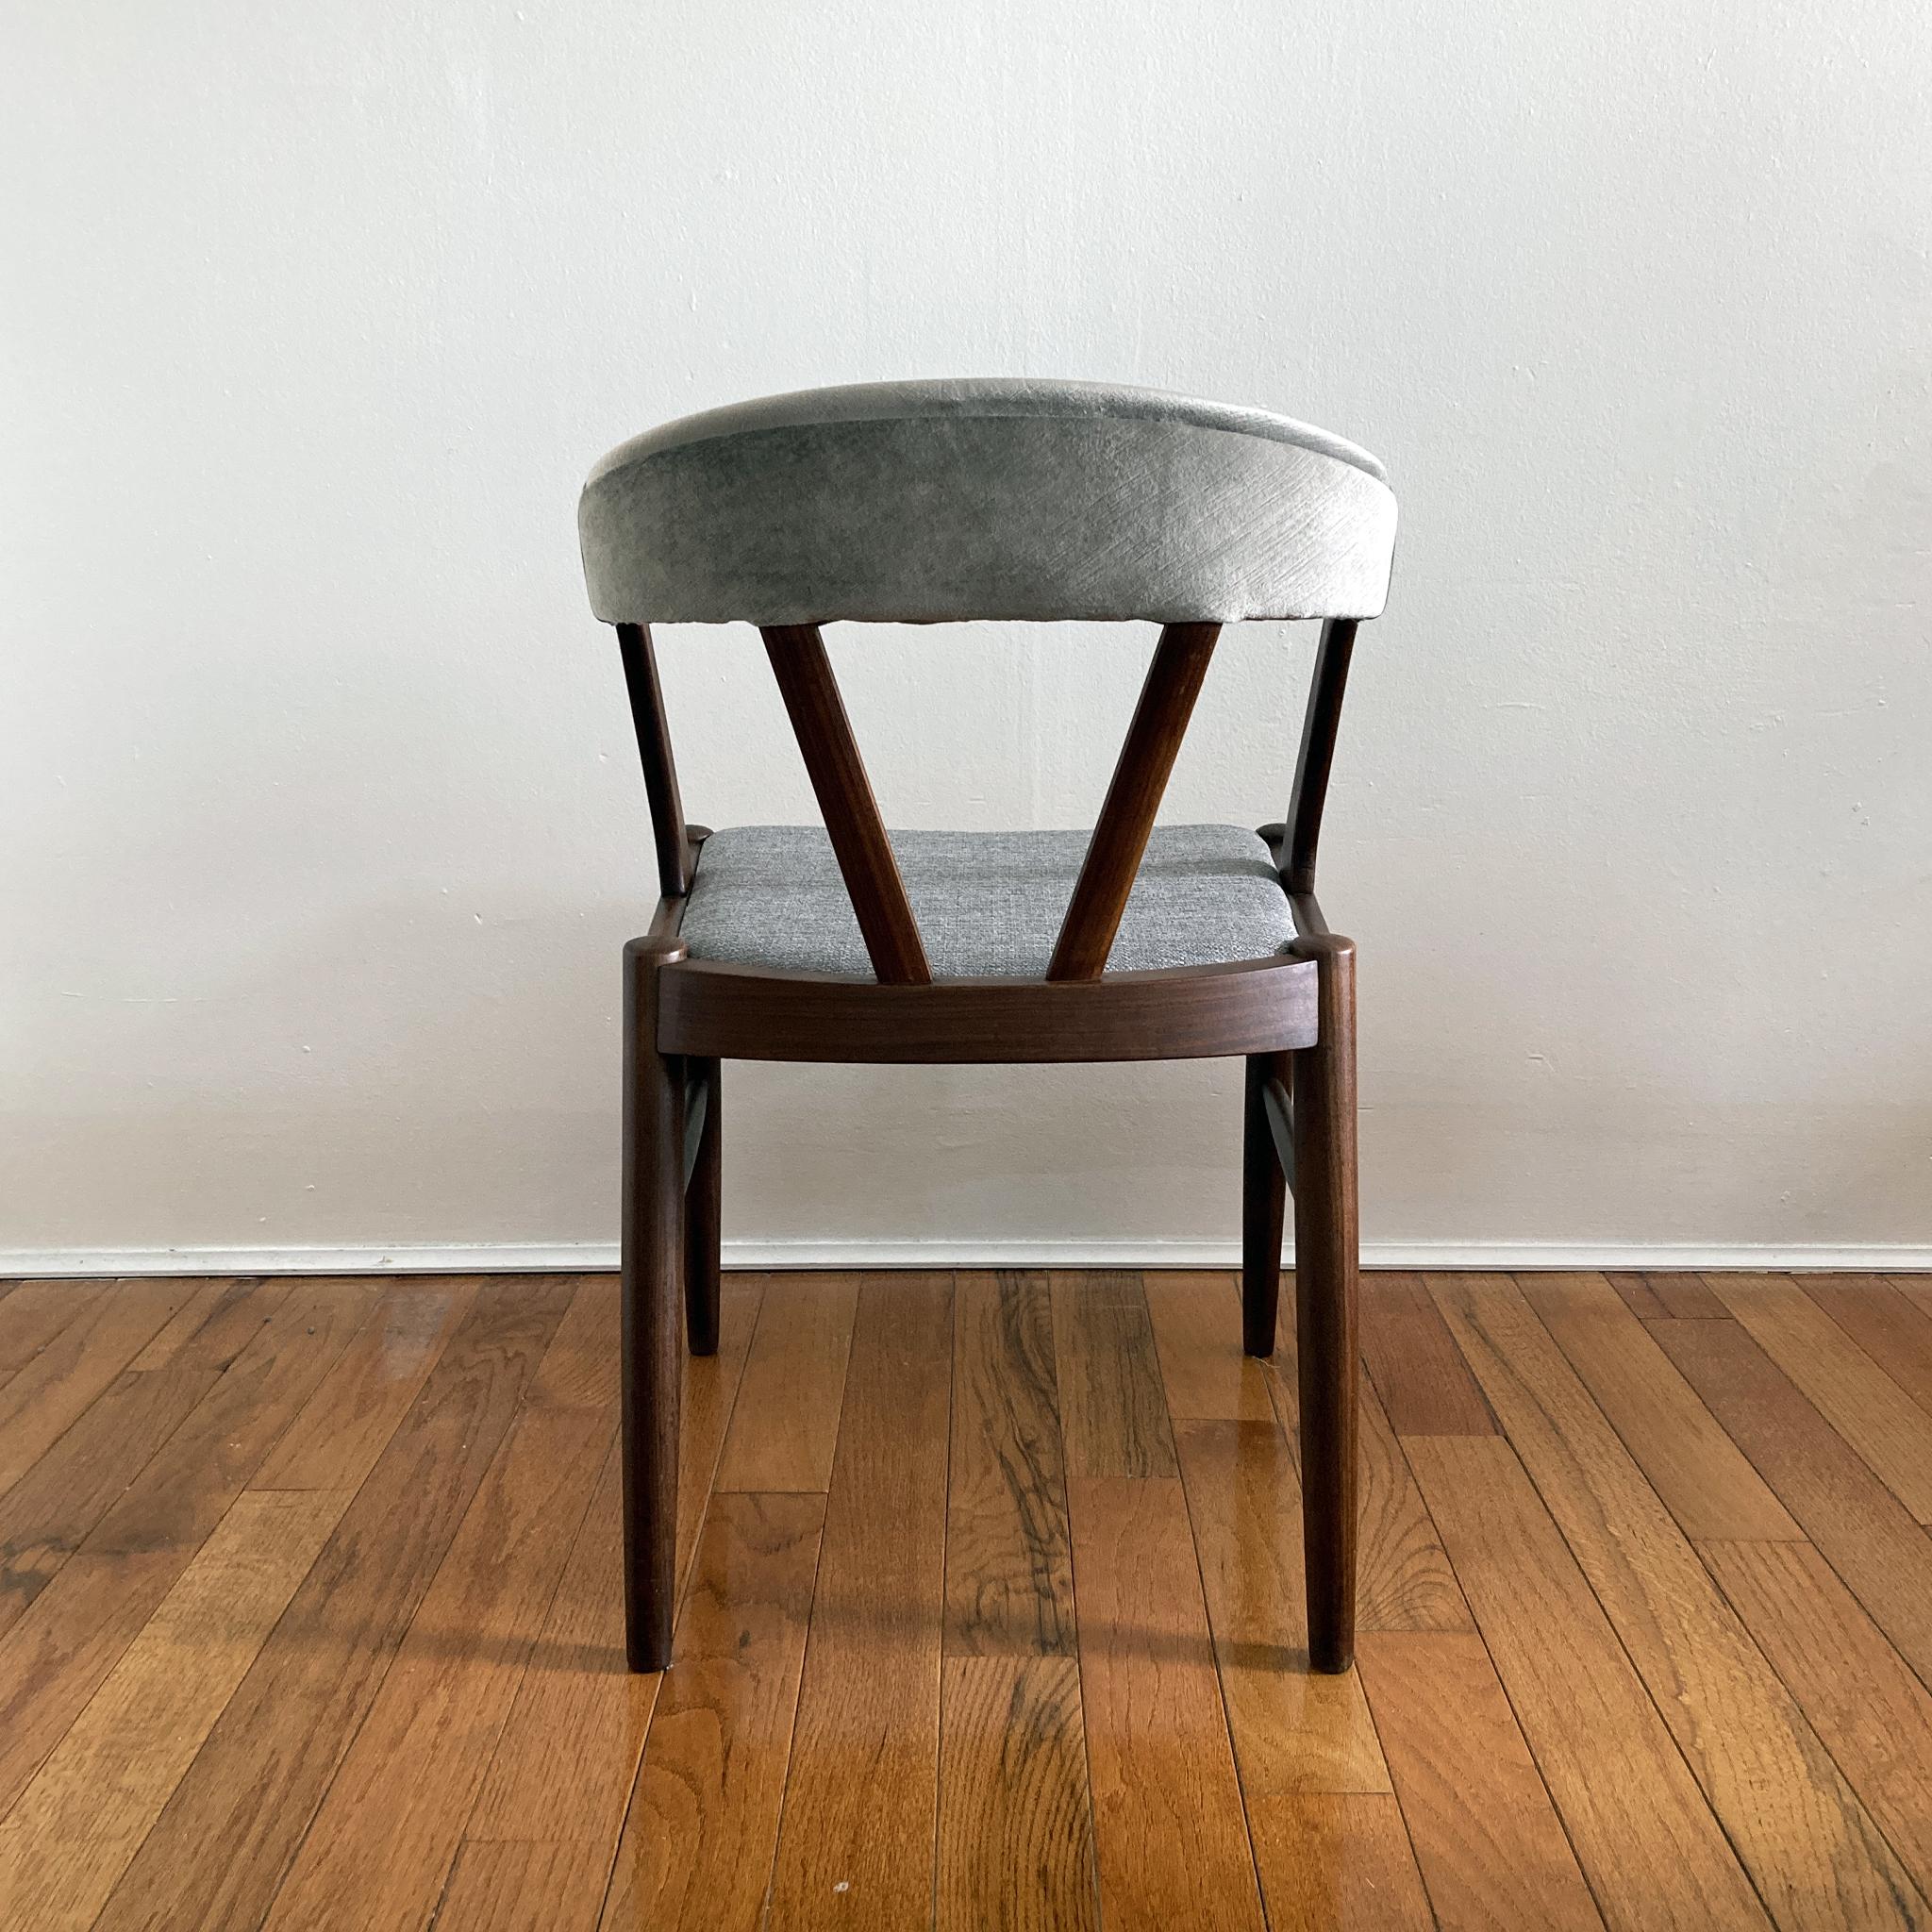 Kai Kristiansen Style Reupholstered Curved Back Gray Teak Chair, Danish, 1960s In Good Condition For Sale In New York, NY